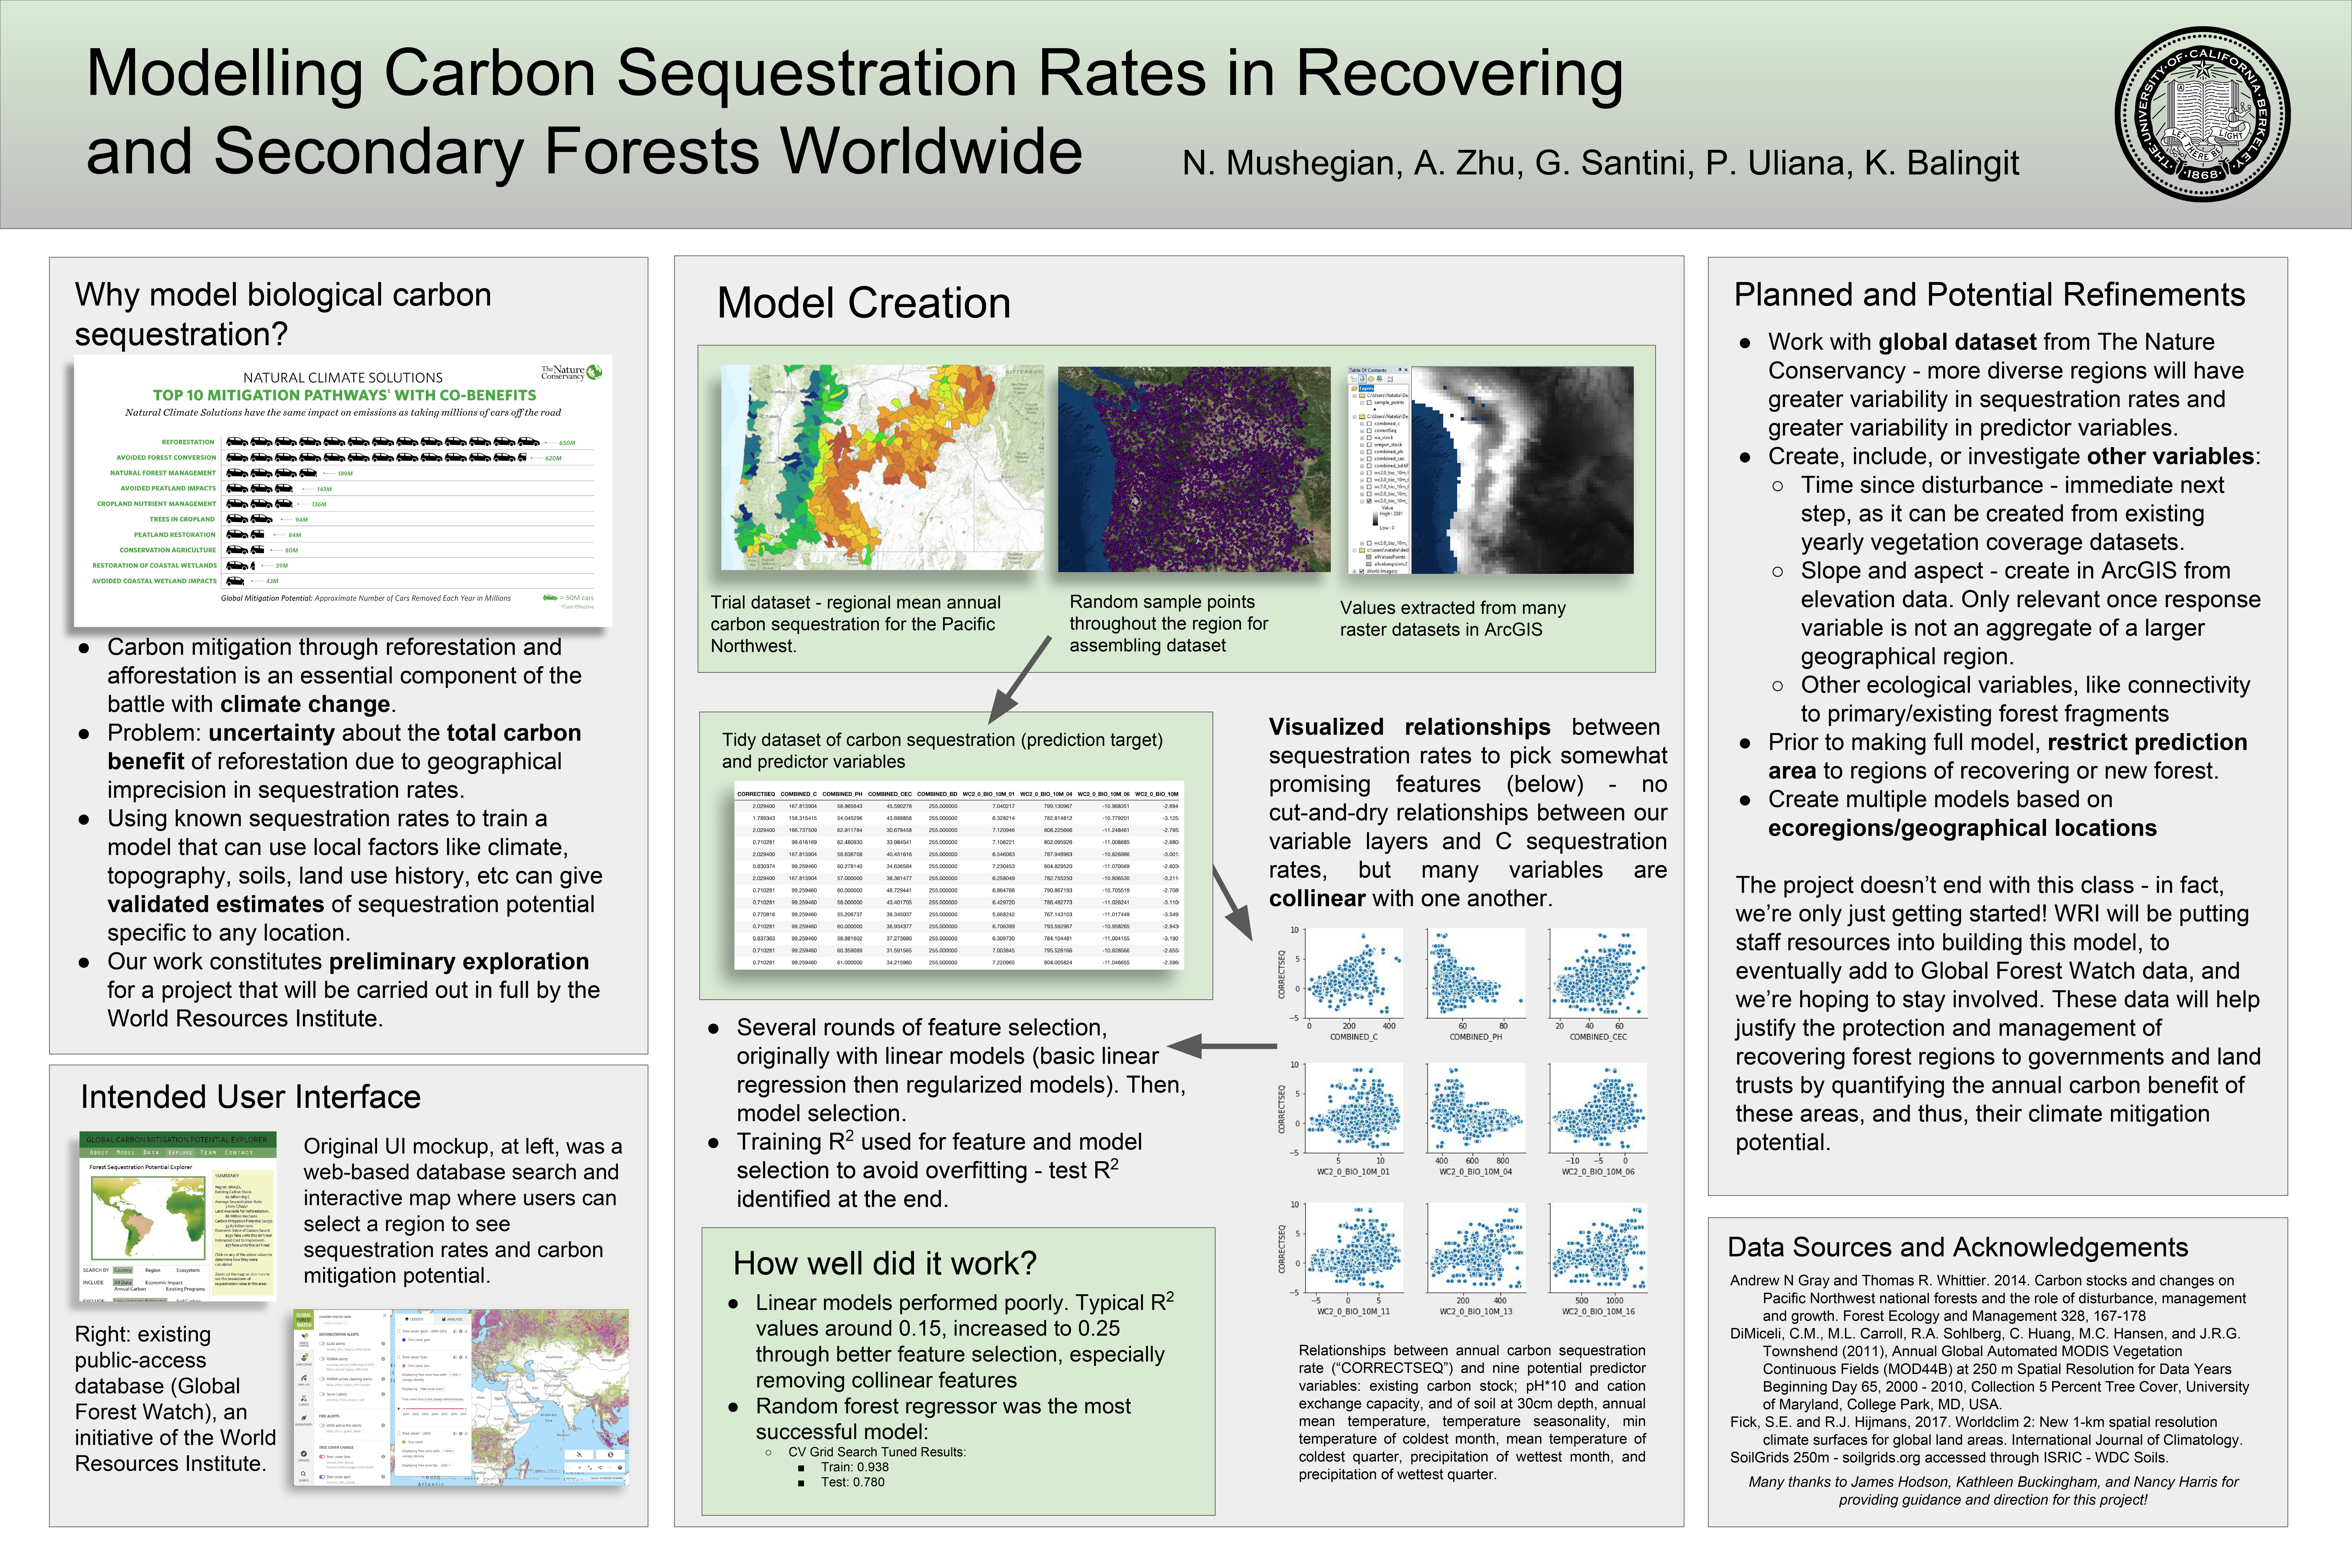 Modeling carbon sequestration rates